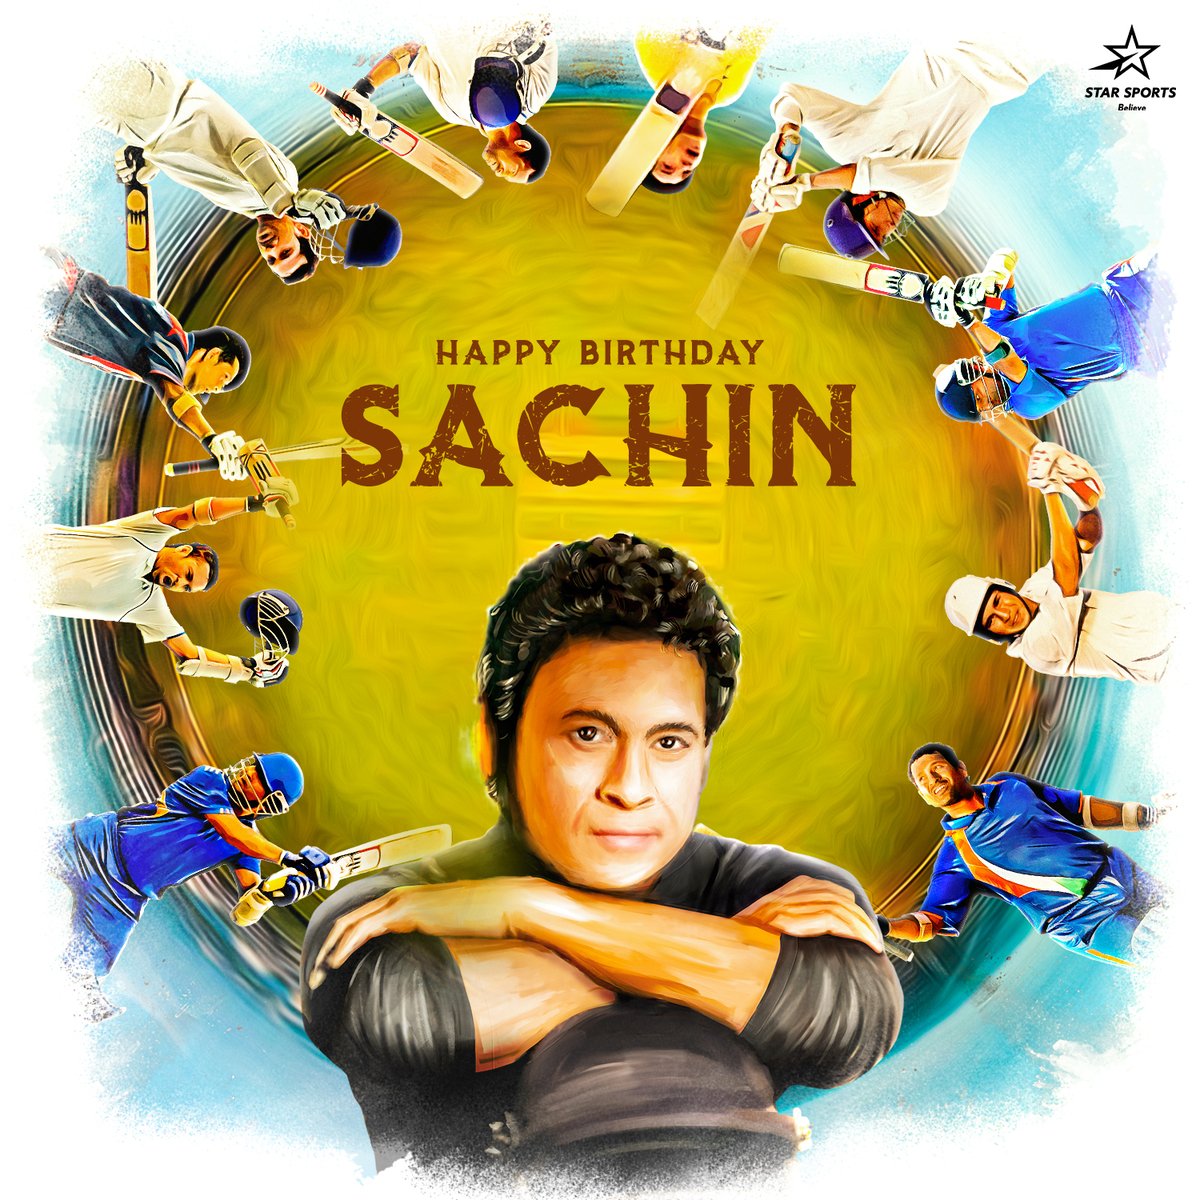 🗣: 𝑺𝒂𝒄𝒉𝒊𝒏… 𝑺𝒂𝒄𝒉𝒊𝒏!!! Repeat after us as we wish @sachin_rt all the good luck on his special day. #HBDSachin #HBDTendulkar #HappyBirthdaySachin